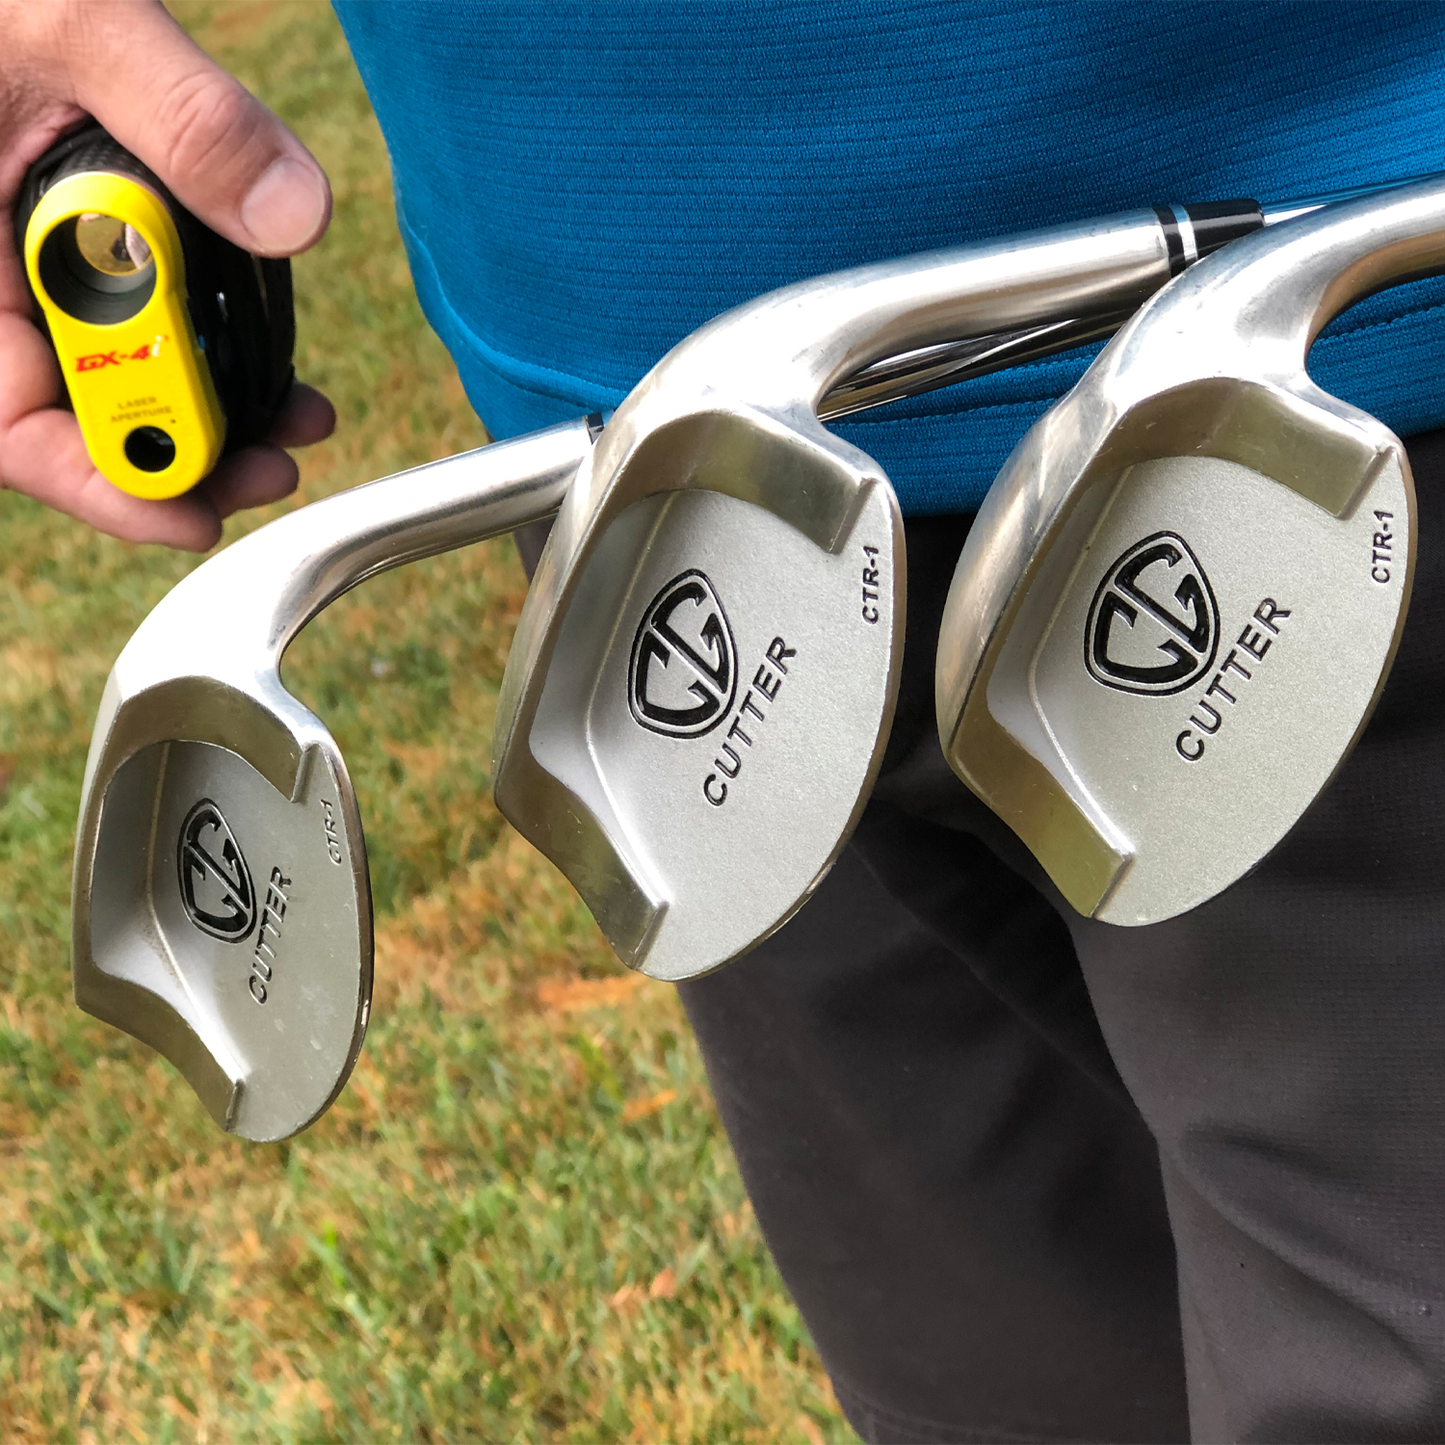 SET of 3 Lofts - 52°, 56° and 58° Lofts by Cutter Golf